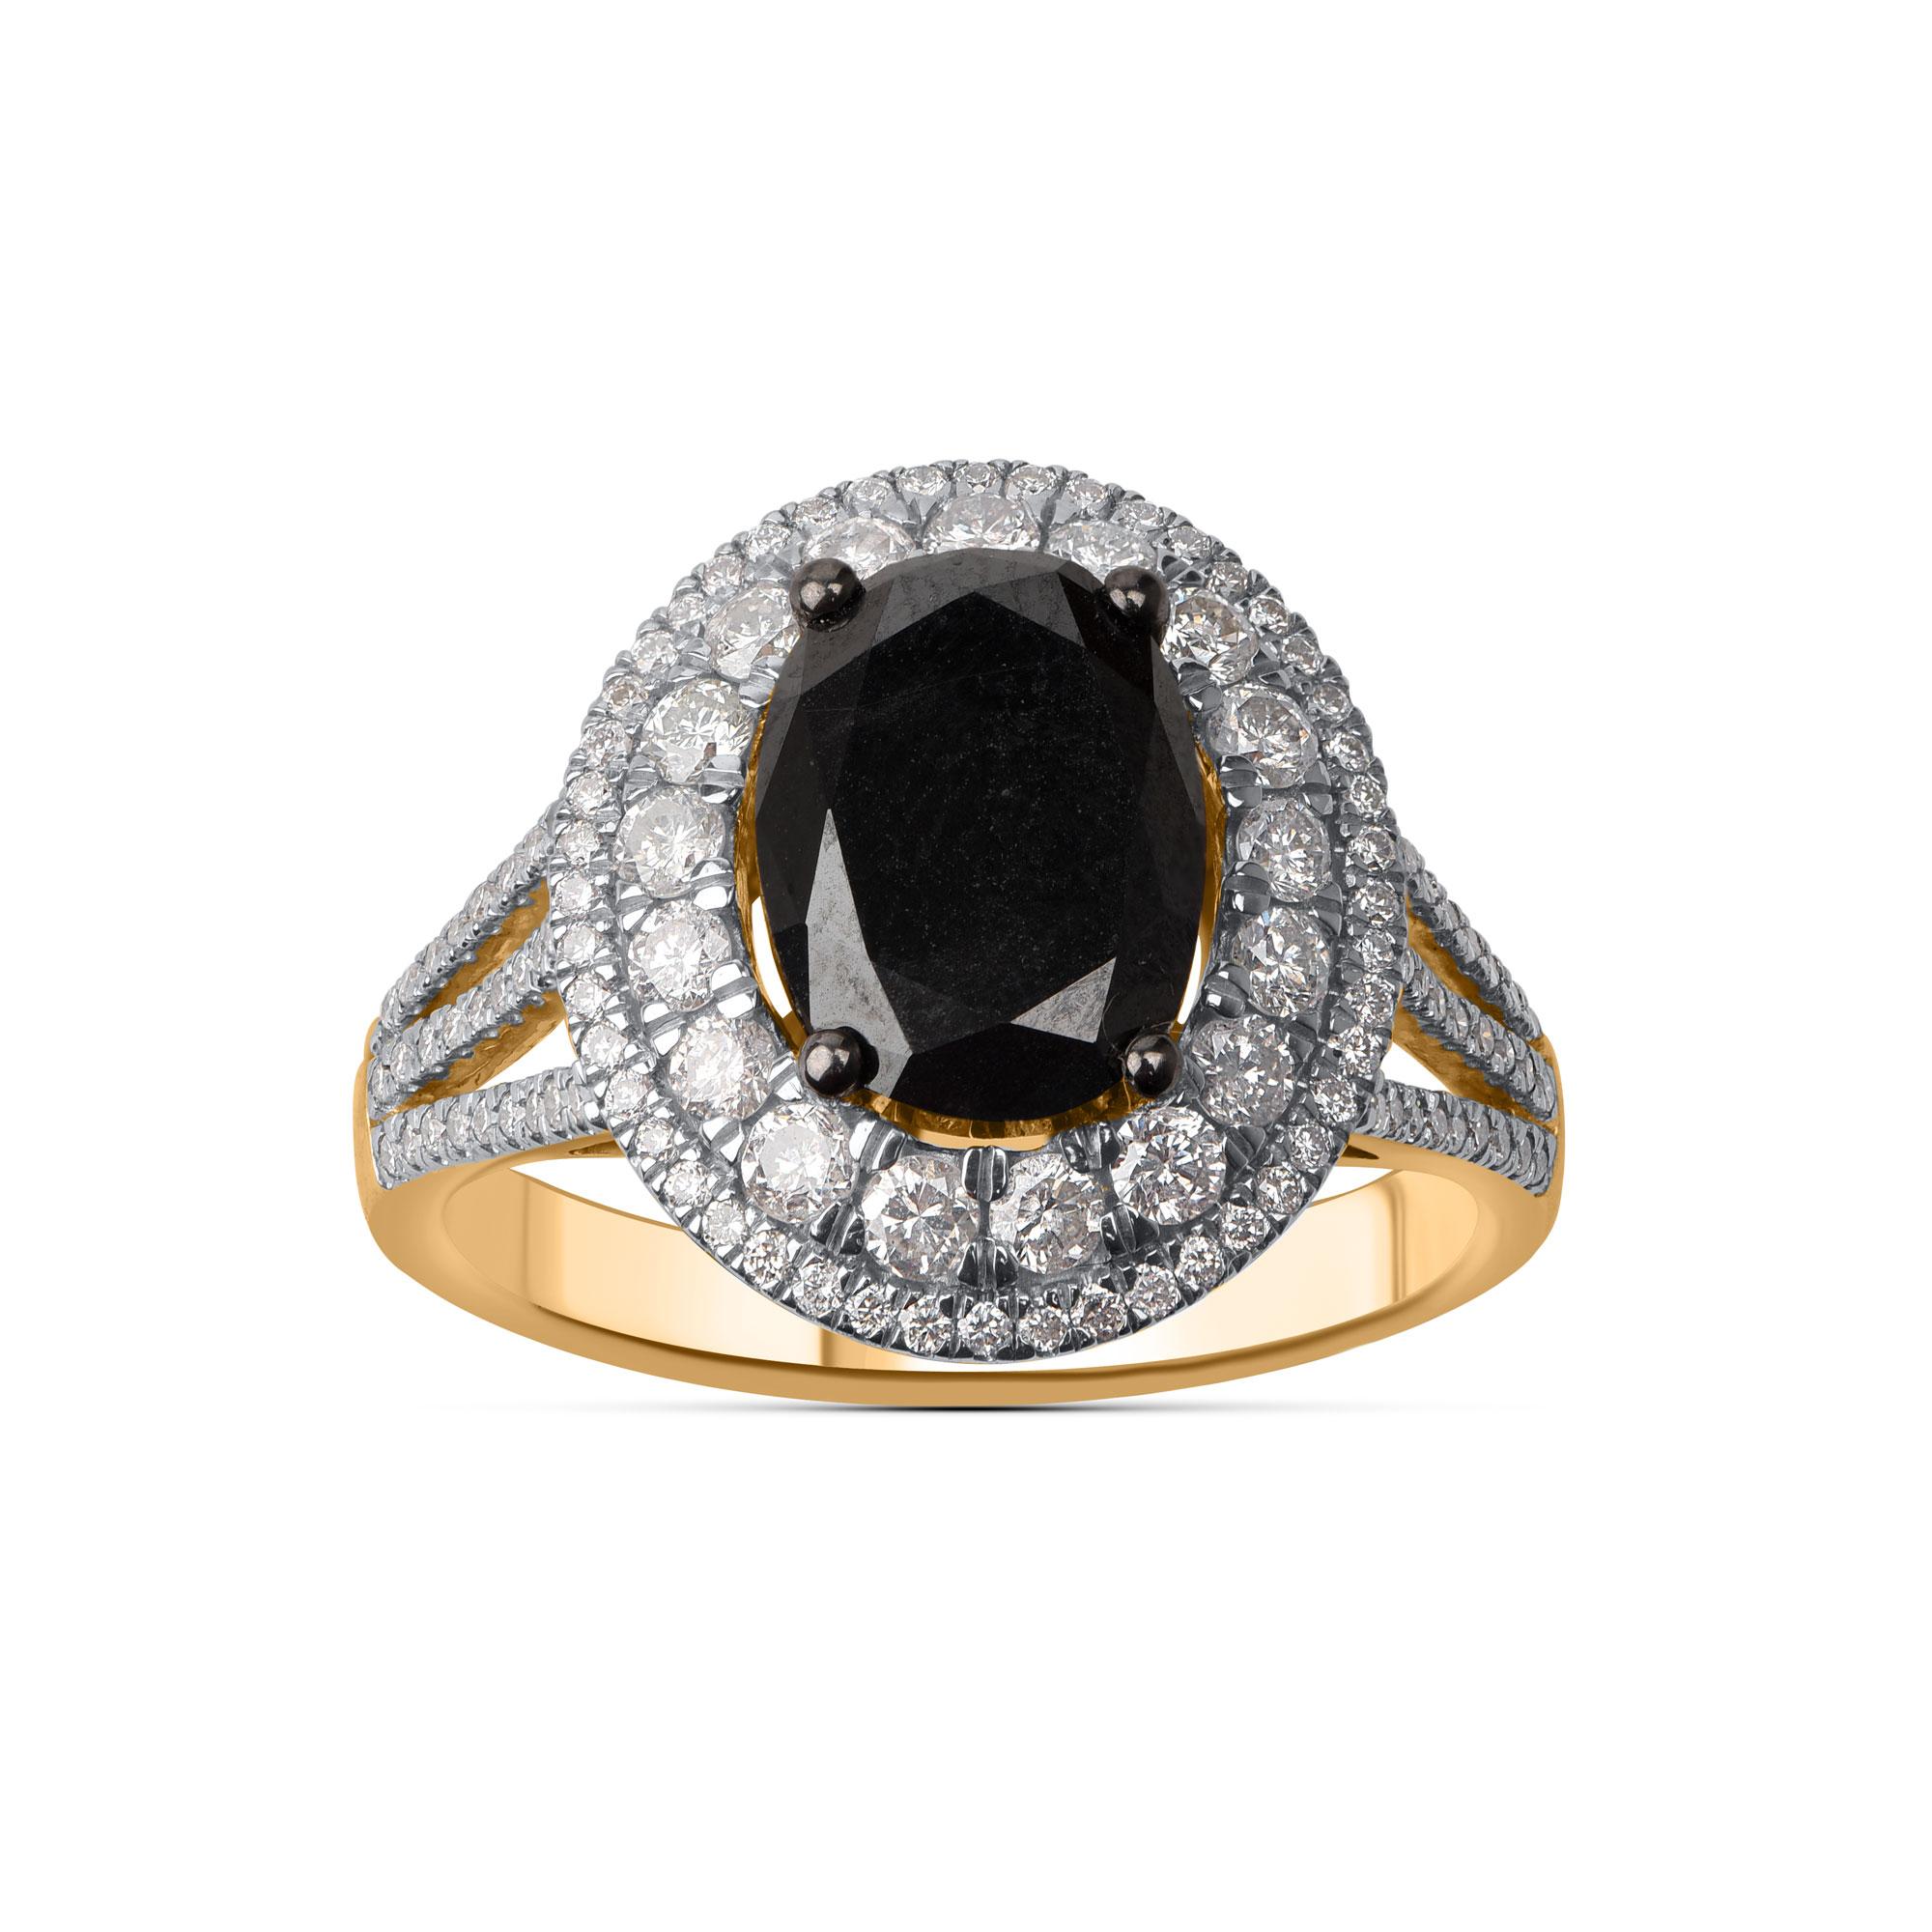 Elegantly designed by our skillful artisans in 14 KT yellow gold and studded with 119 brilliant and 1 black diamond in prong setting. Diamonds are graded  HI color, I2 clarity. An updated take on a classic, this sparkling diamond engagement ring is